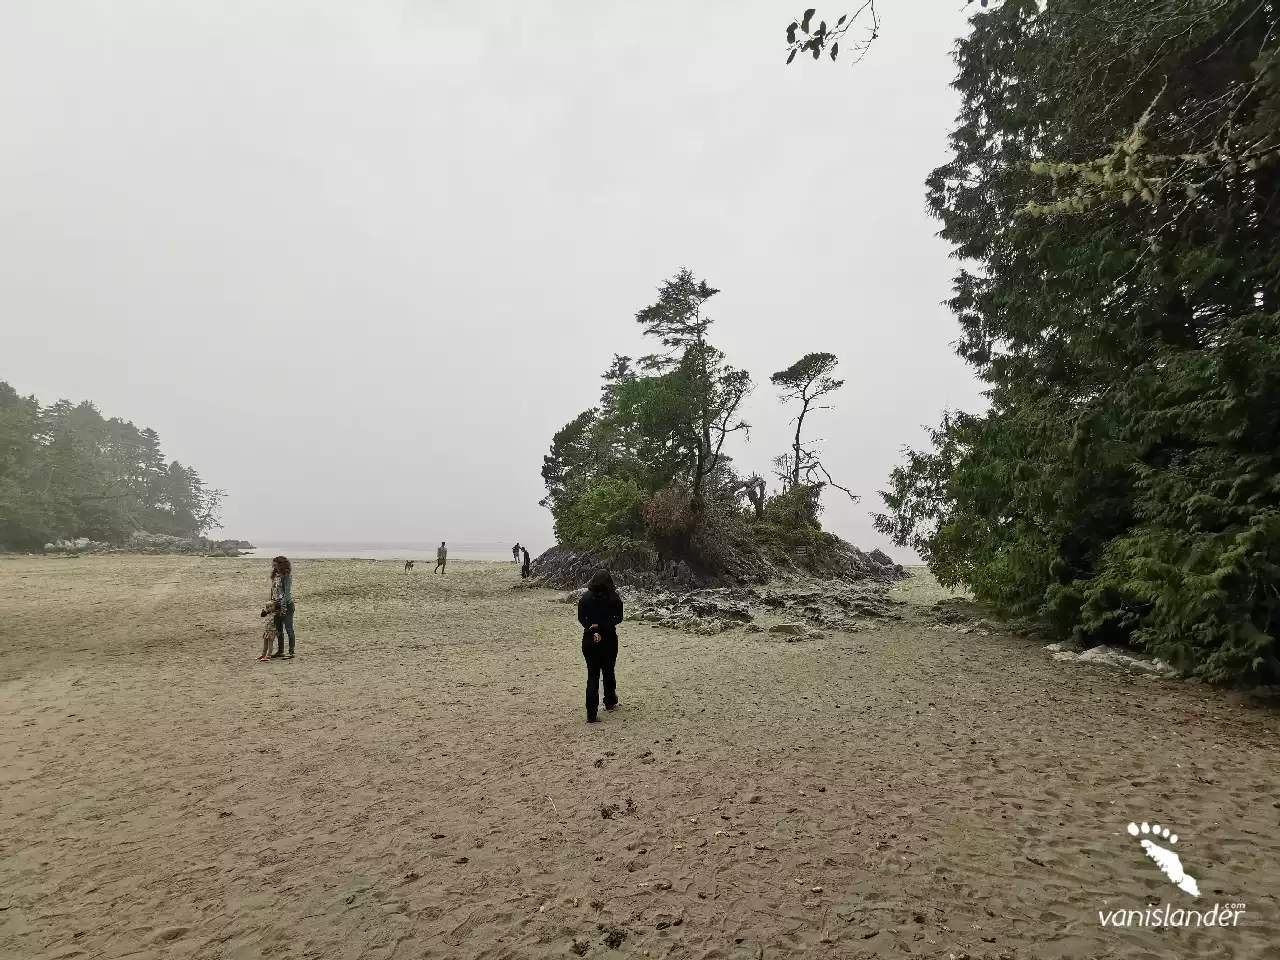 People waling on the beach at Tonquin Park -  Vancouver Island